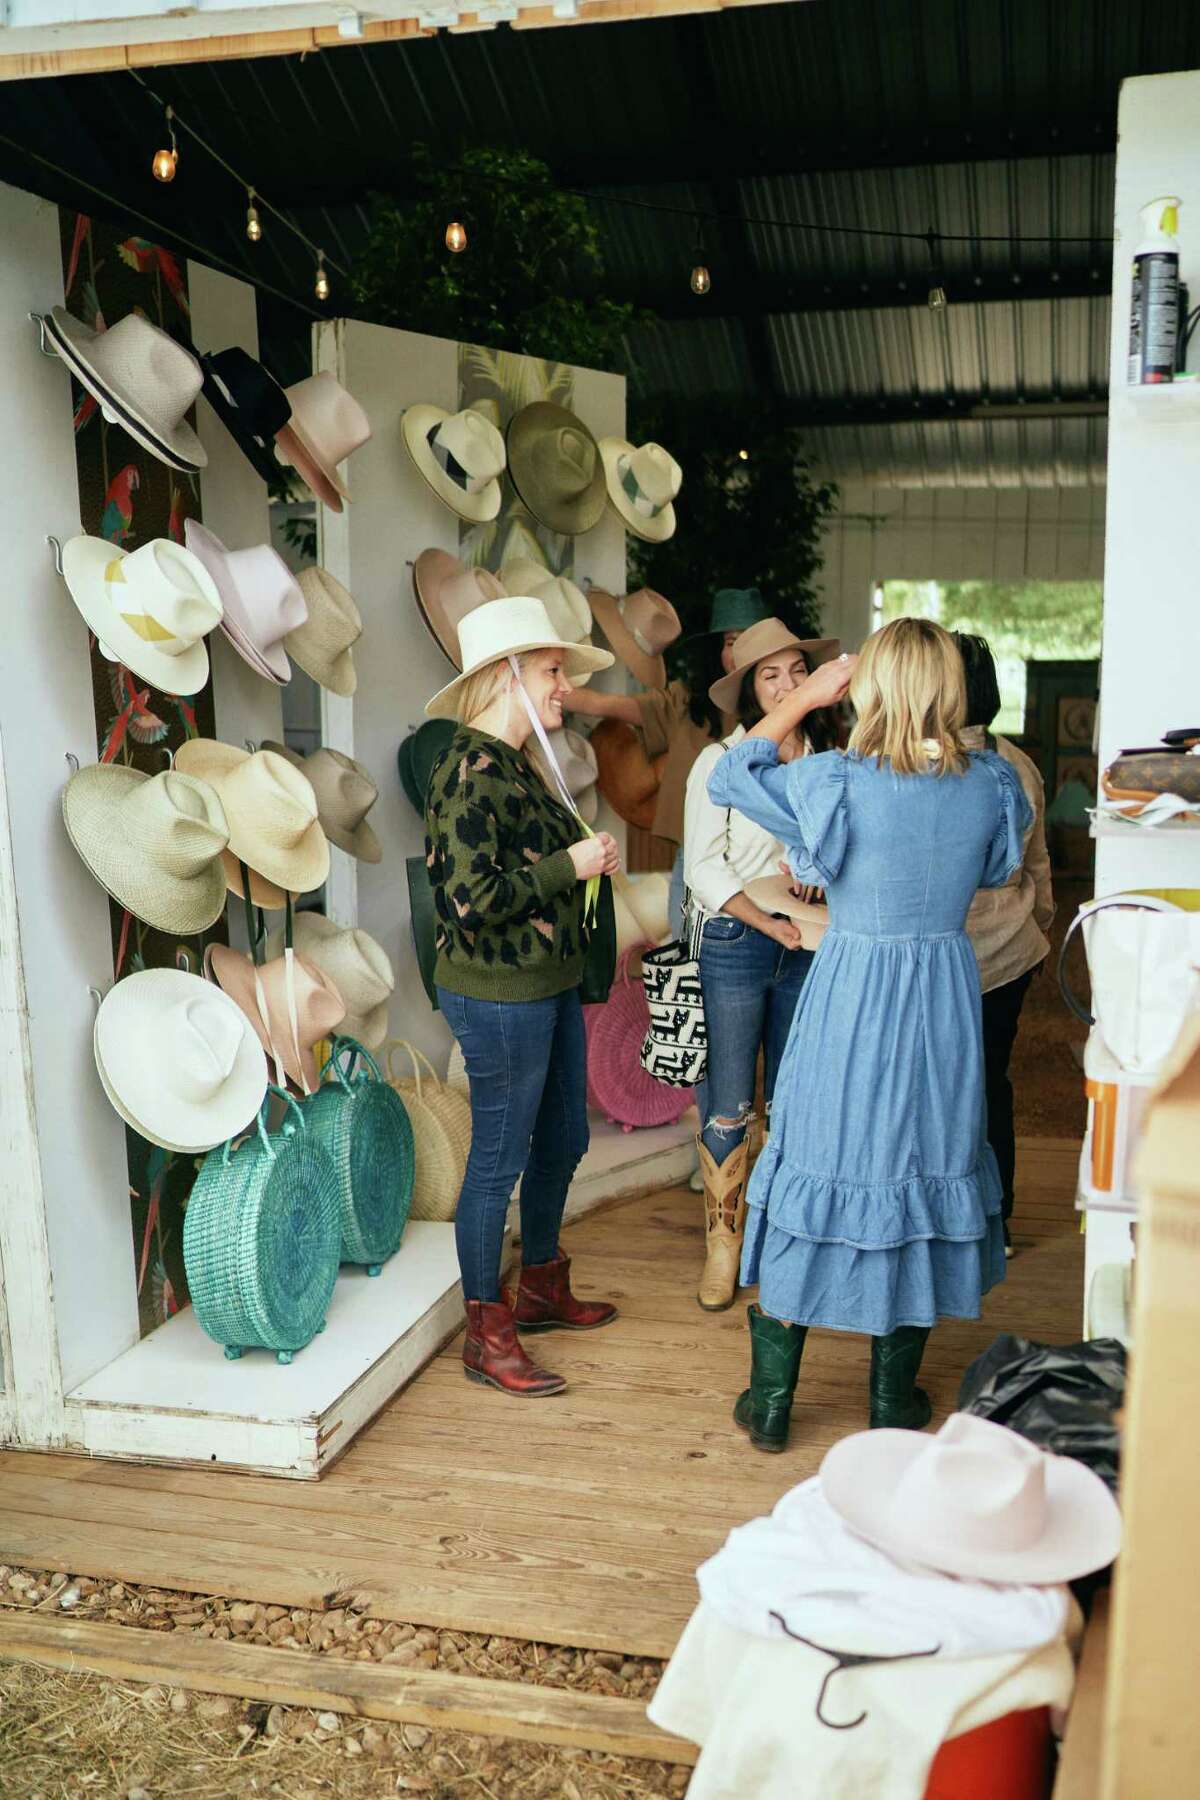 Kristin Light, the designer behind hat brand Sissy Light, is a fixture at Round Top.